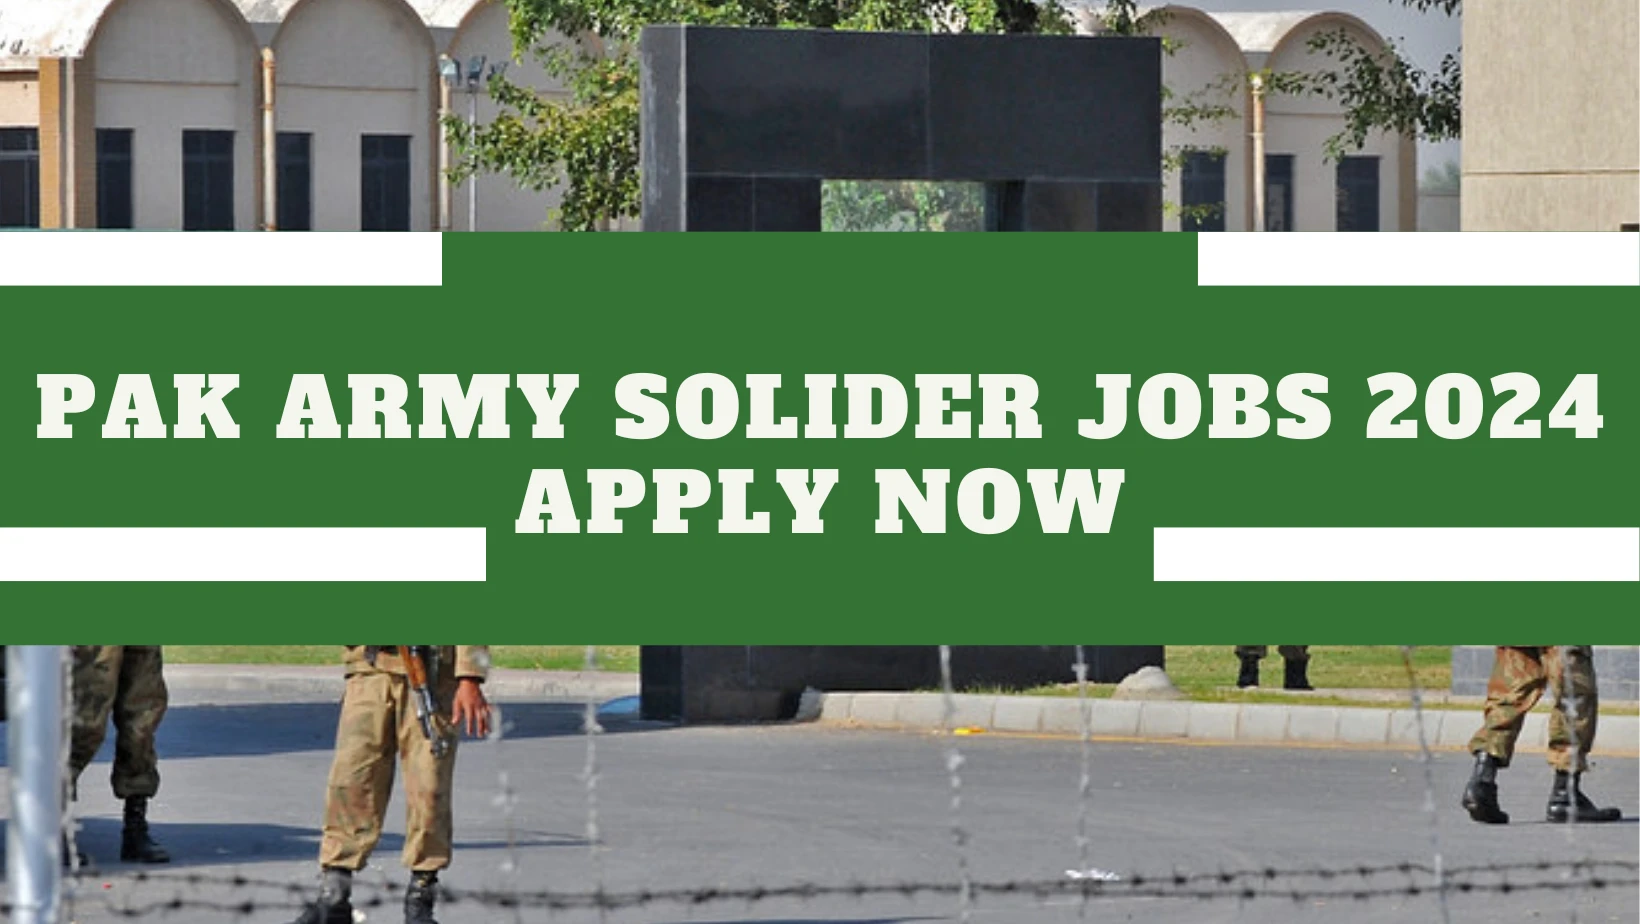 PAK ARMY SOLIDER JOBS 2024 | APPLY NOW AT WWW.JOINPAKARMY.GOV.PK